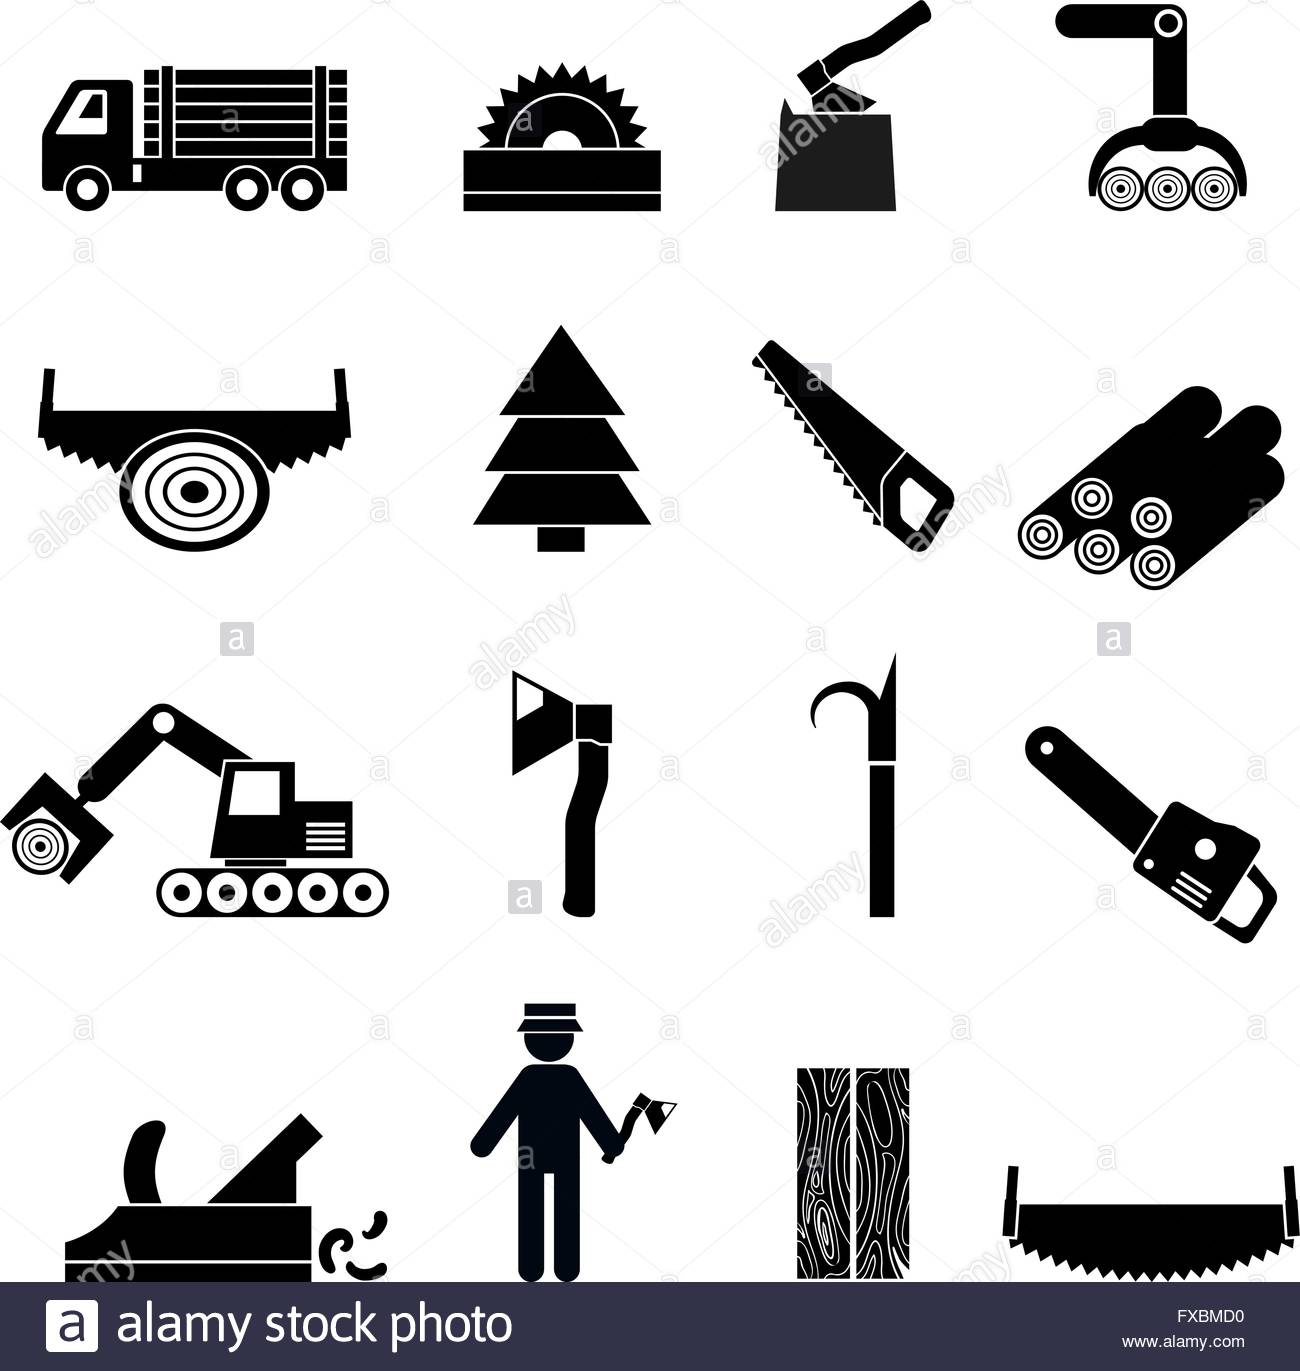 Saw, tool, woodworking icon | Icon search engine